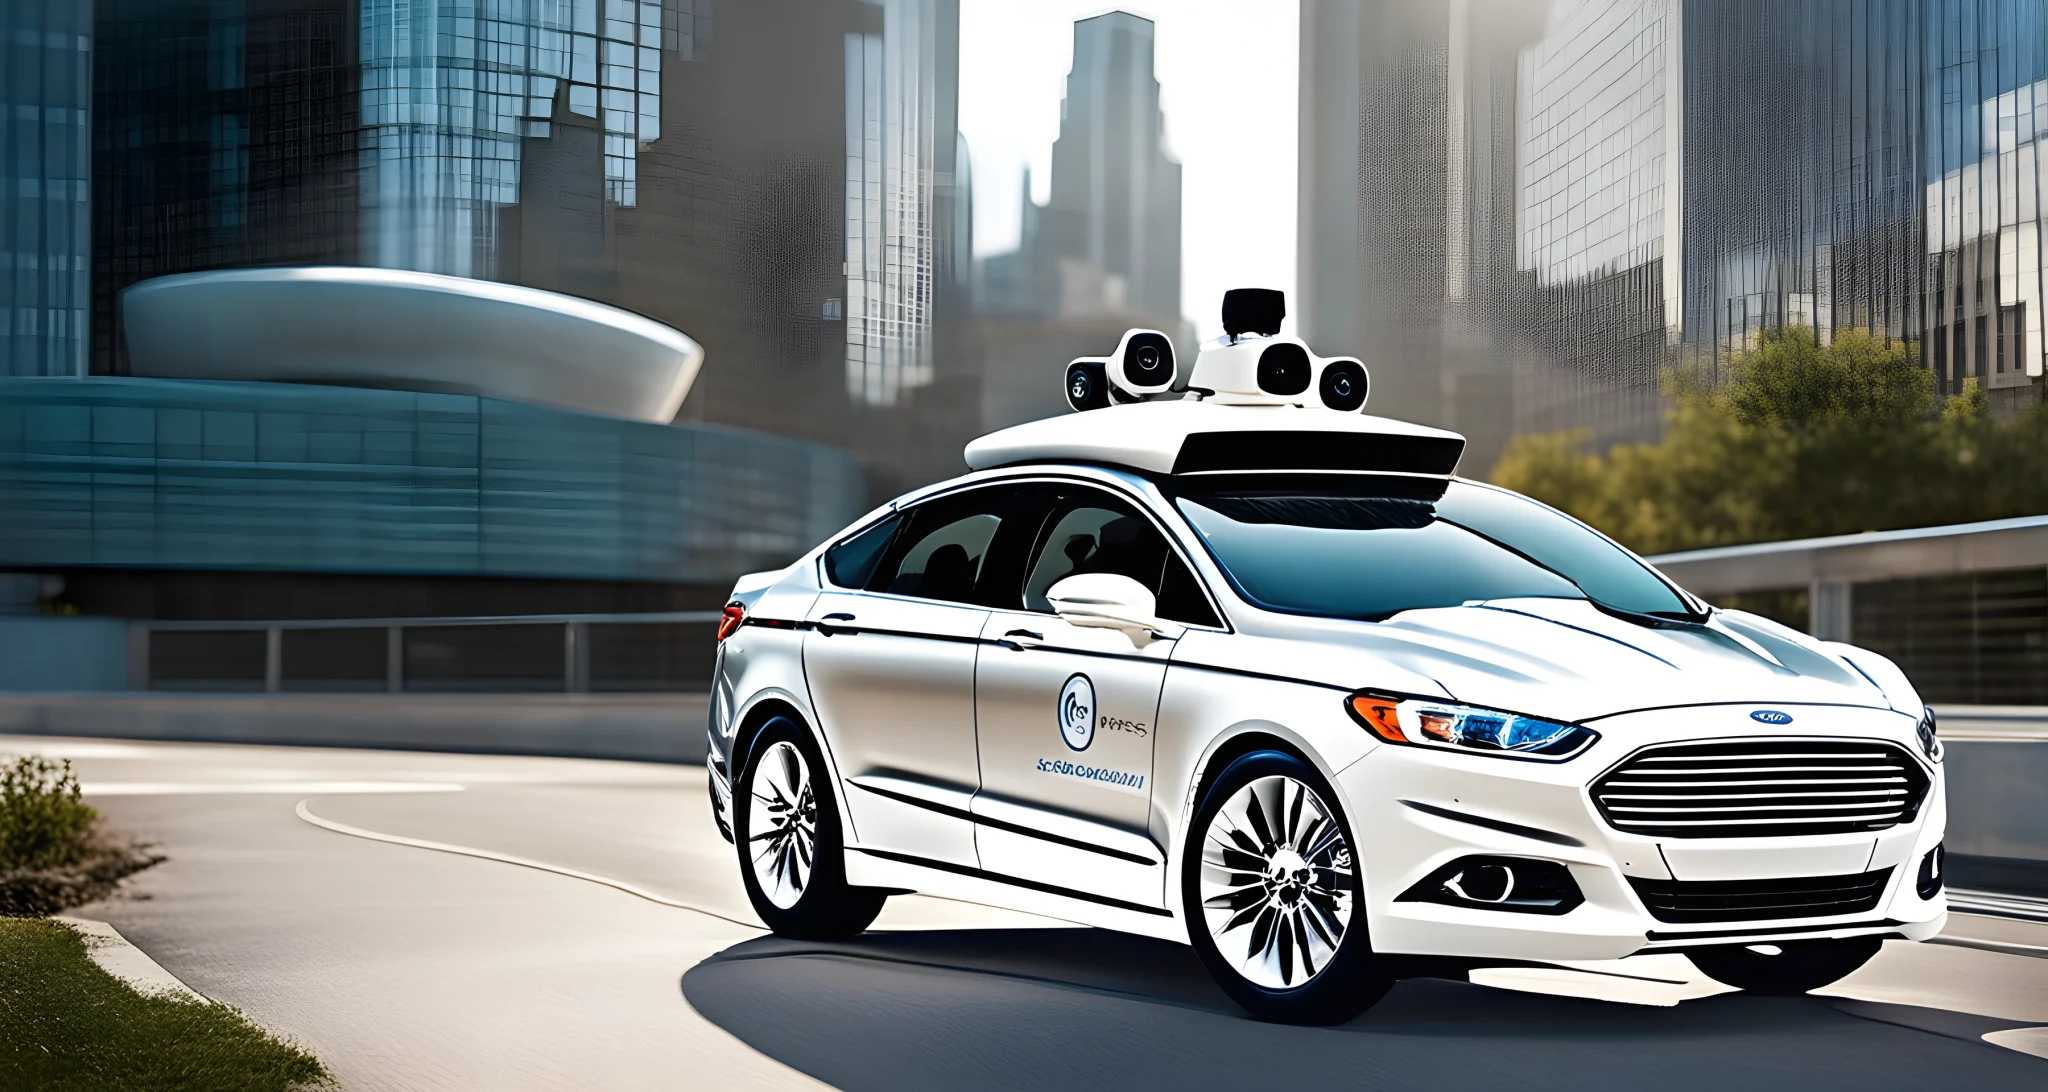 The image shows a sleek, white Ford self-driving car, with sensors and cameras mounted on the roof. A financial report for Ford is displayed alongside, with graphs and charts indicating potential cost savings and revenue opportunities from self-driving technology.